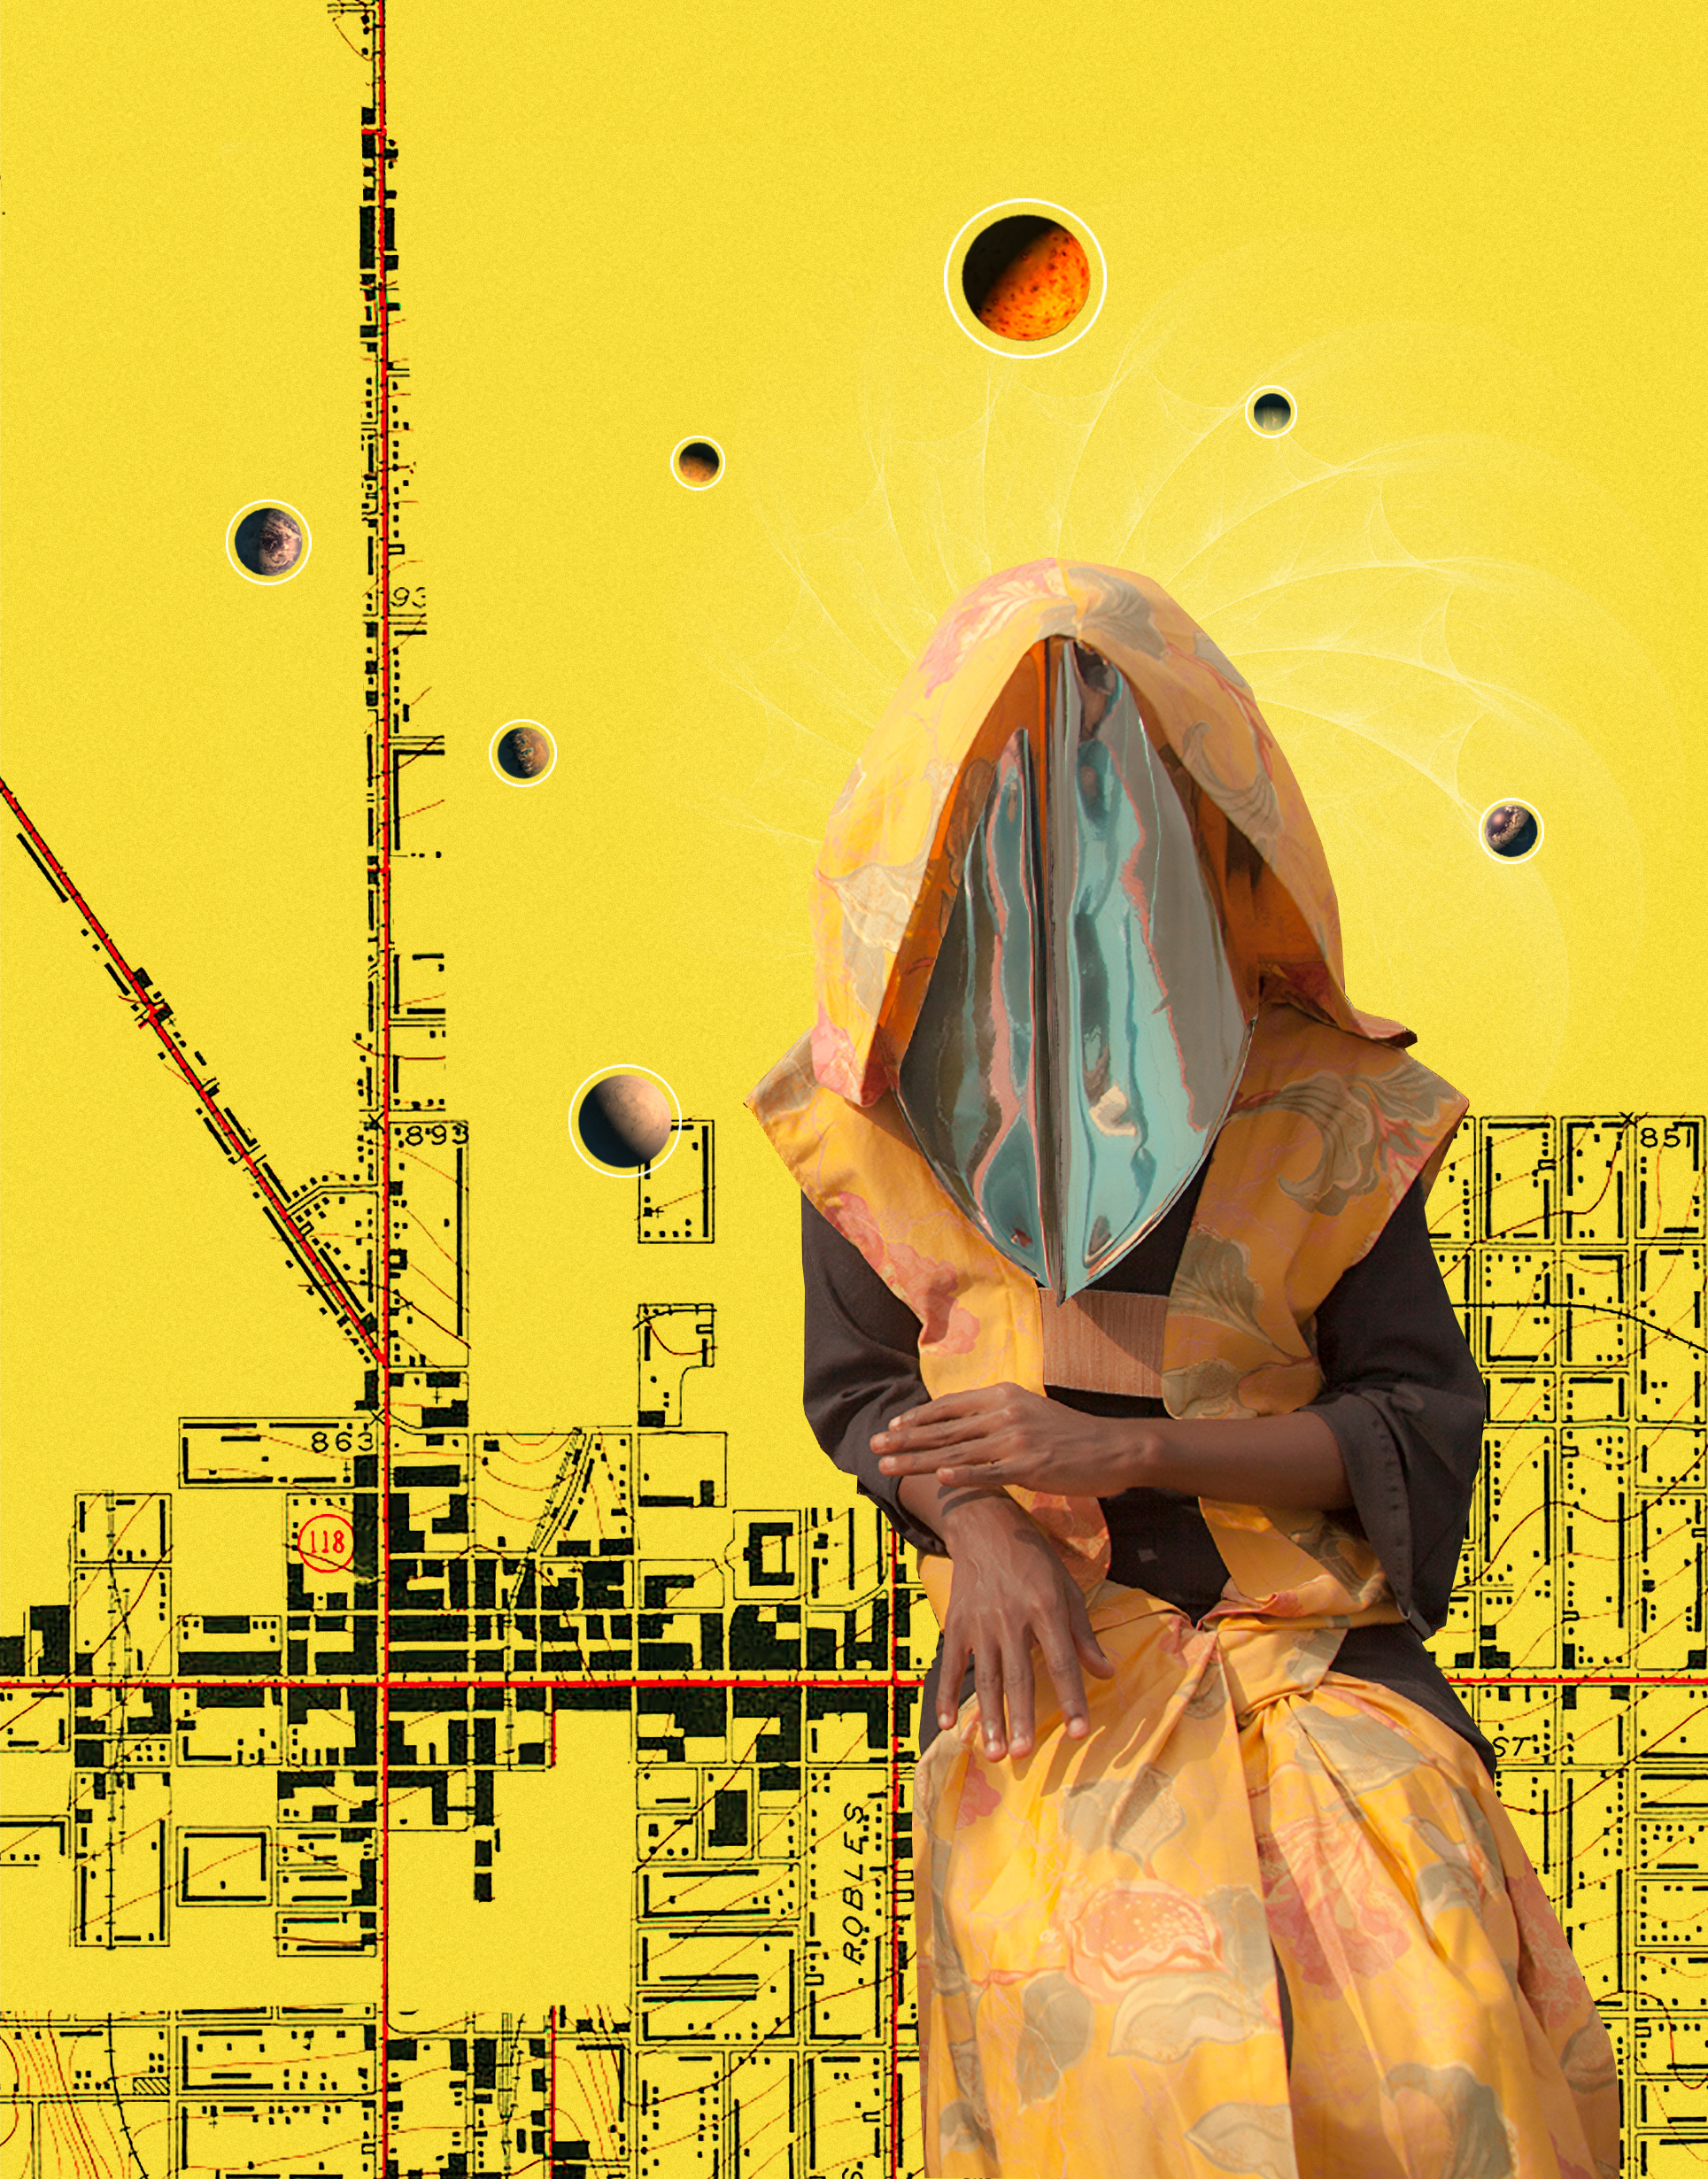 A collage created by Helios Design Lab shows a hooded person in front of a yellow map backdrop. Photo courtesy of Marissa Jahn.